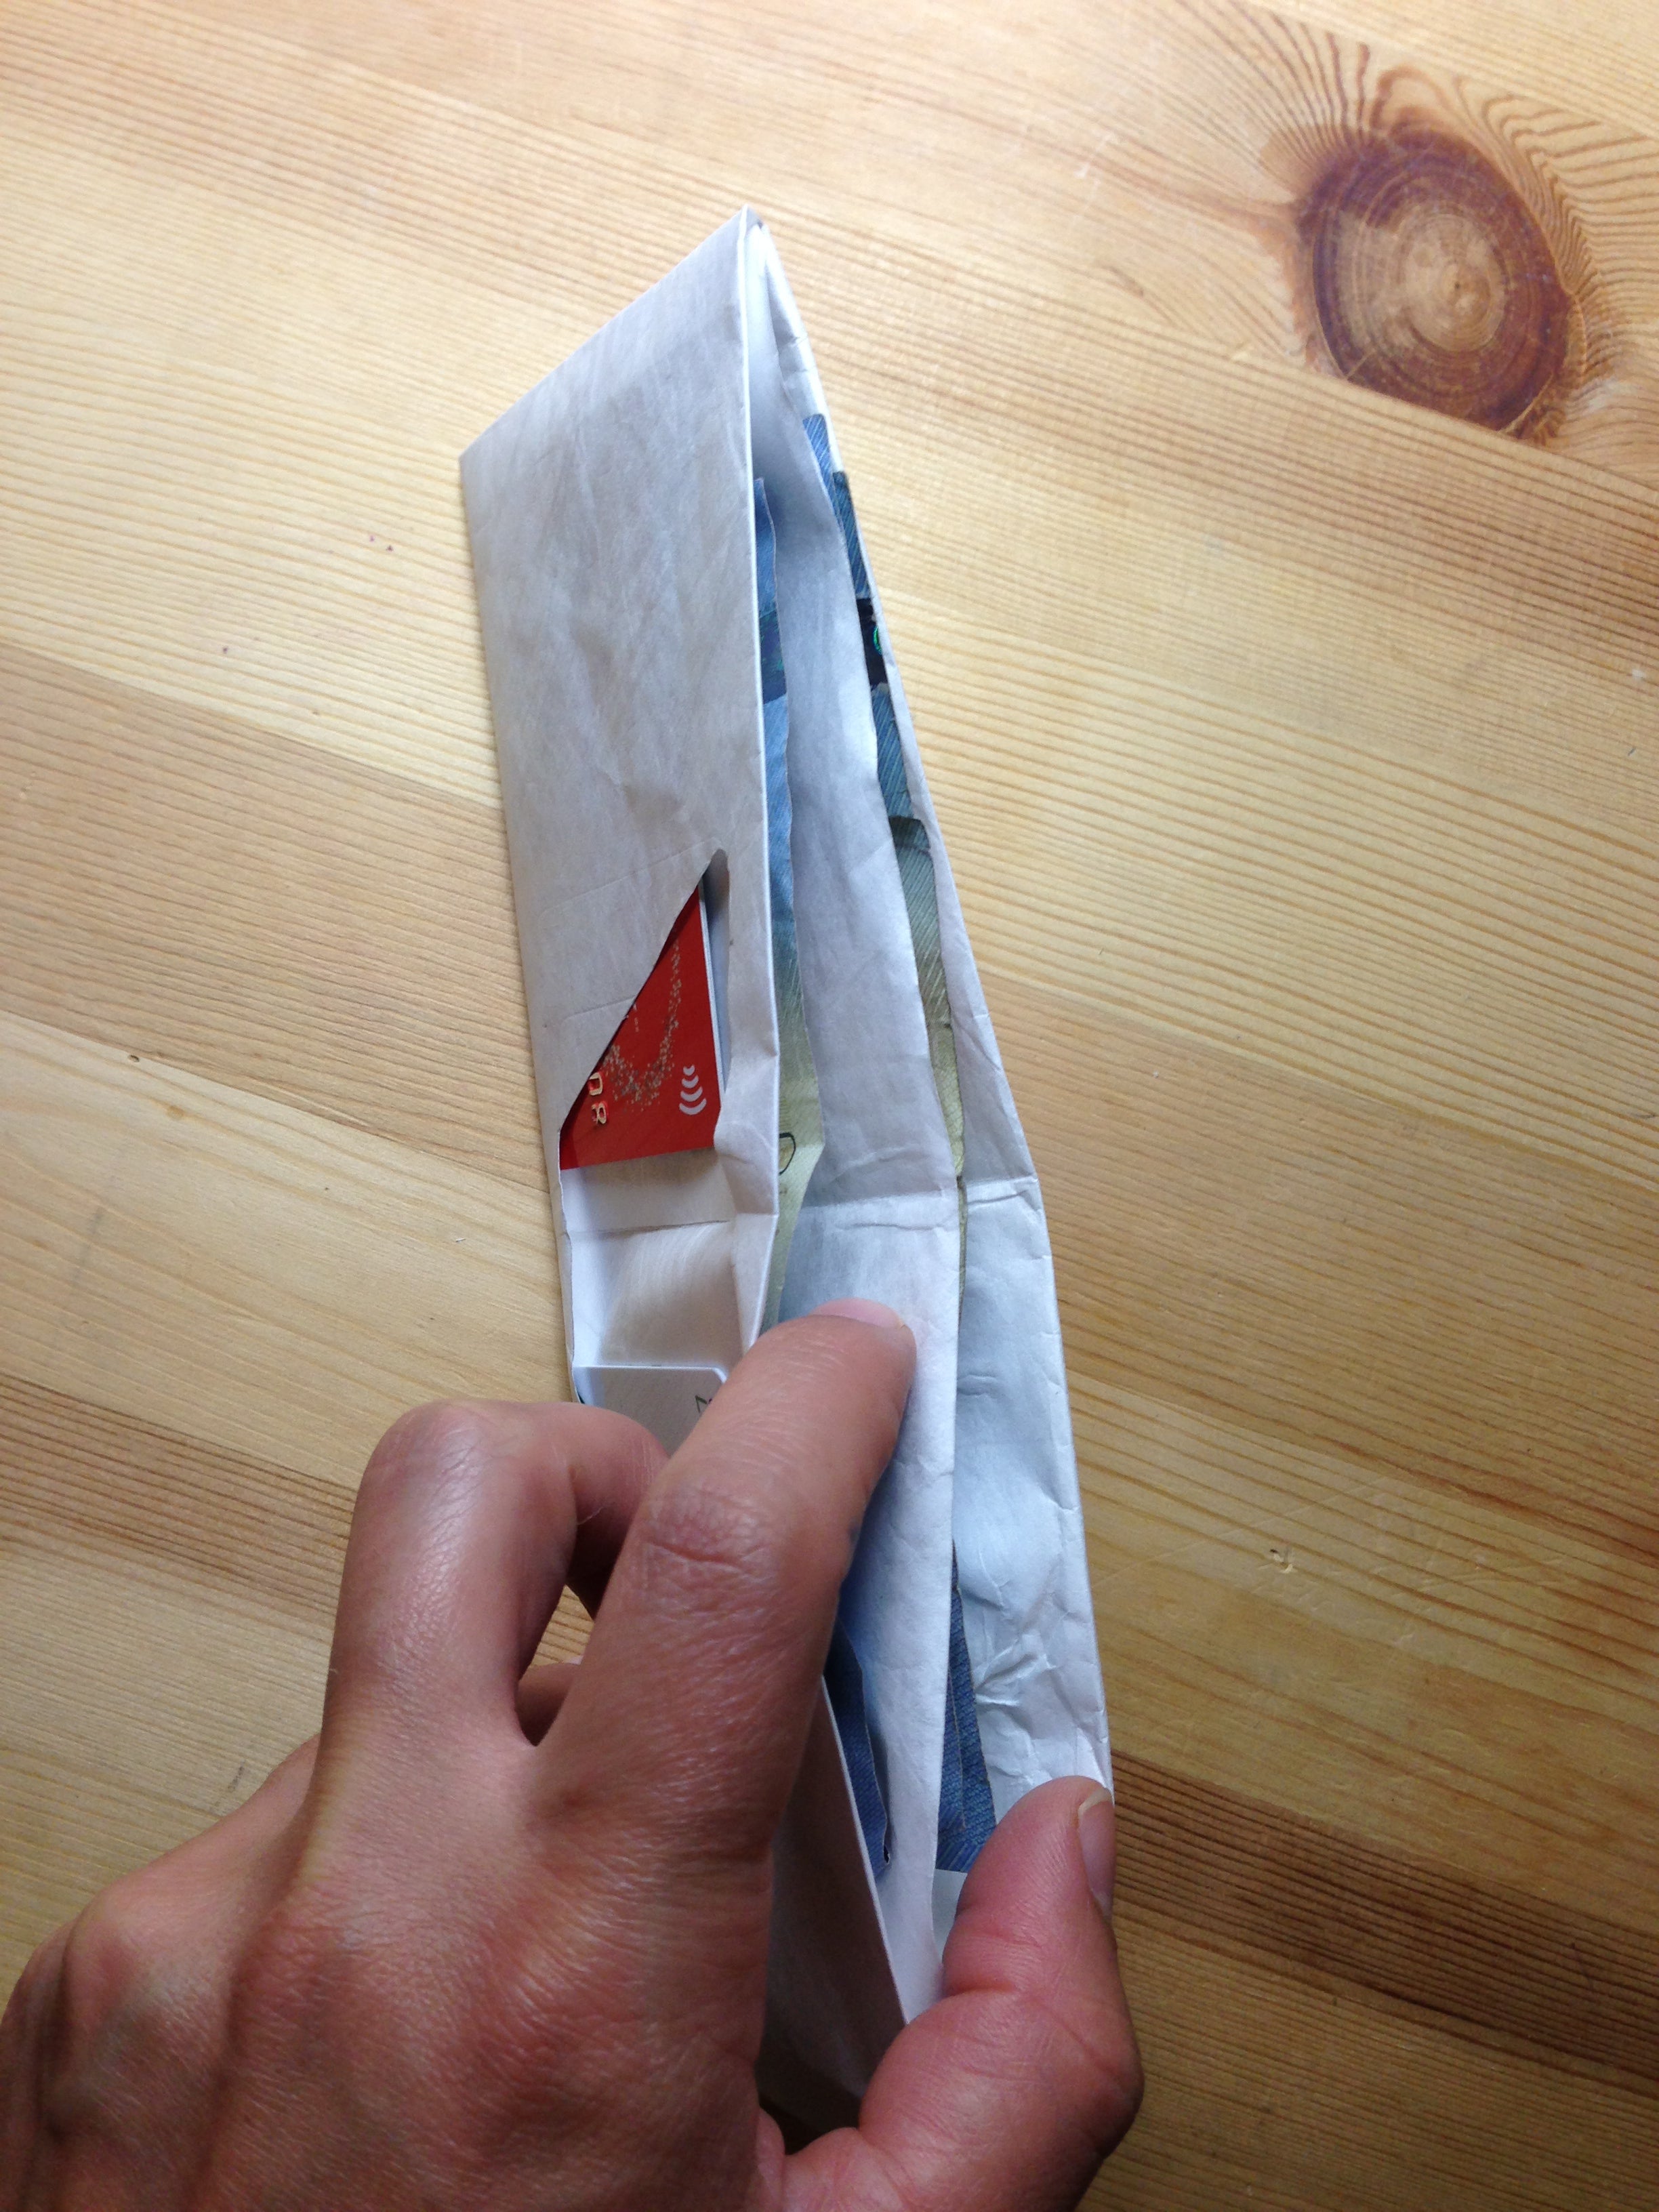 How To Use Tyvek To Make A Sturdy Shoe Wallet {No Sew} - Create To Donate